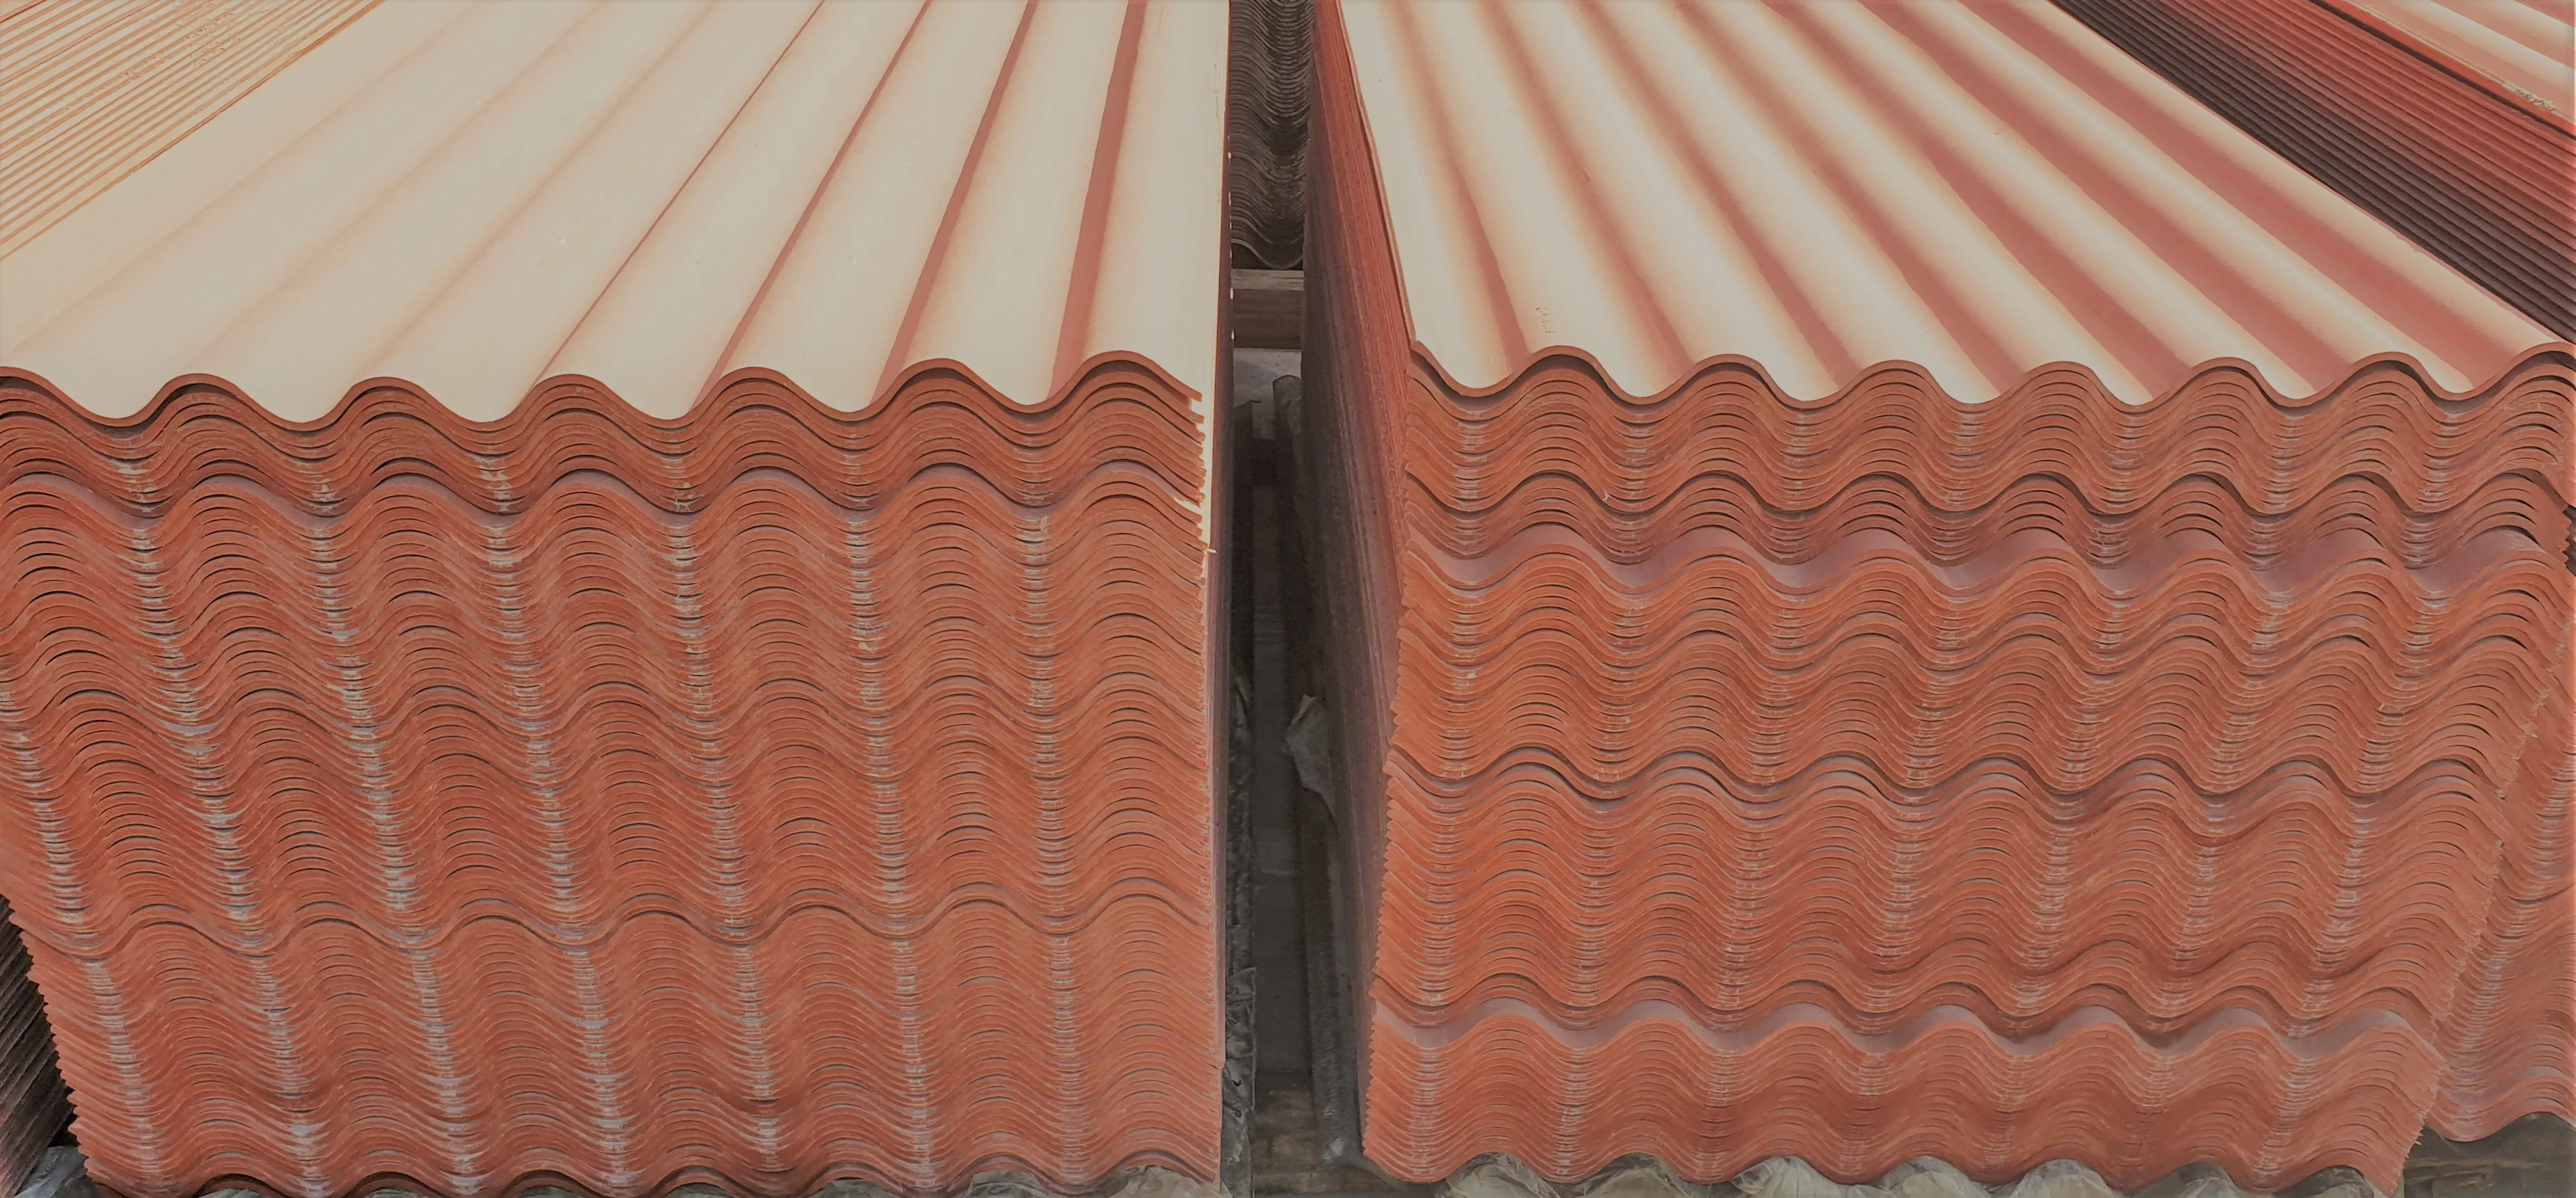 100% Non Asbestos Fiber Cement Corrugated Roofing Sheets With High Quality And Reasonable Price